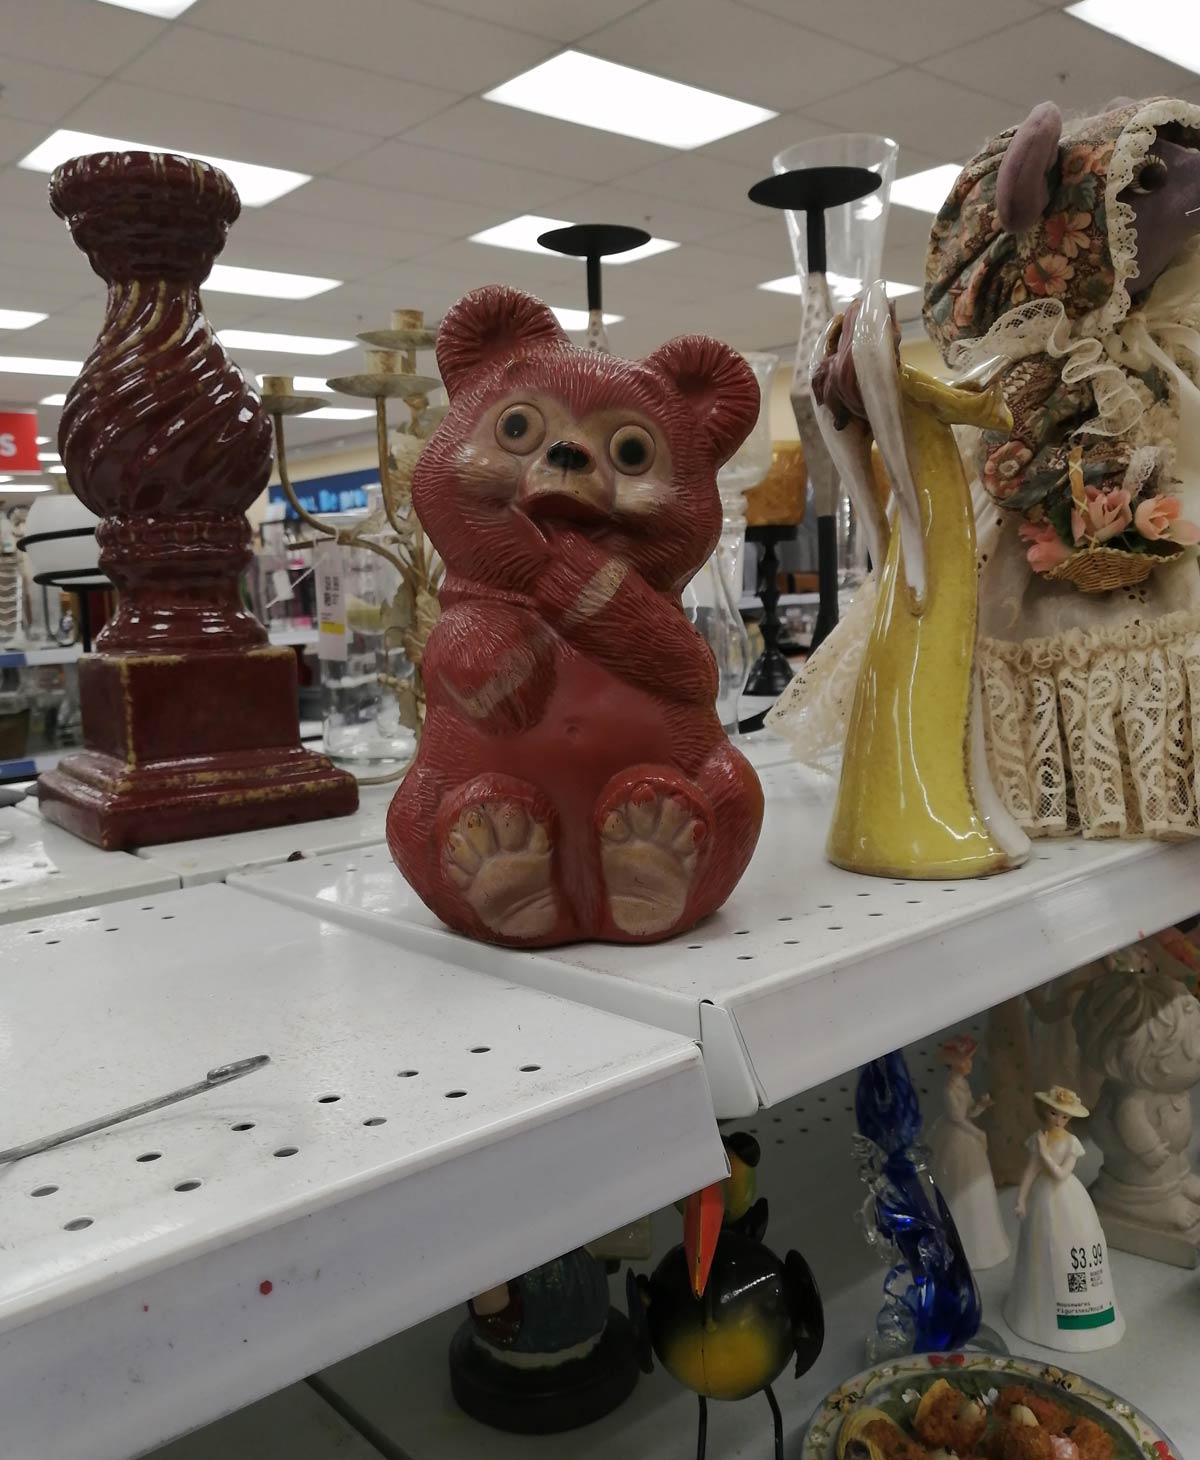 My girlfriend wouldn't let me buy this bear, she said it would bring demons into our home...